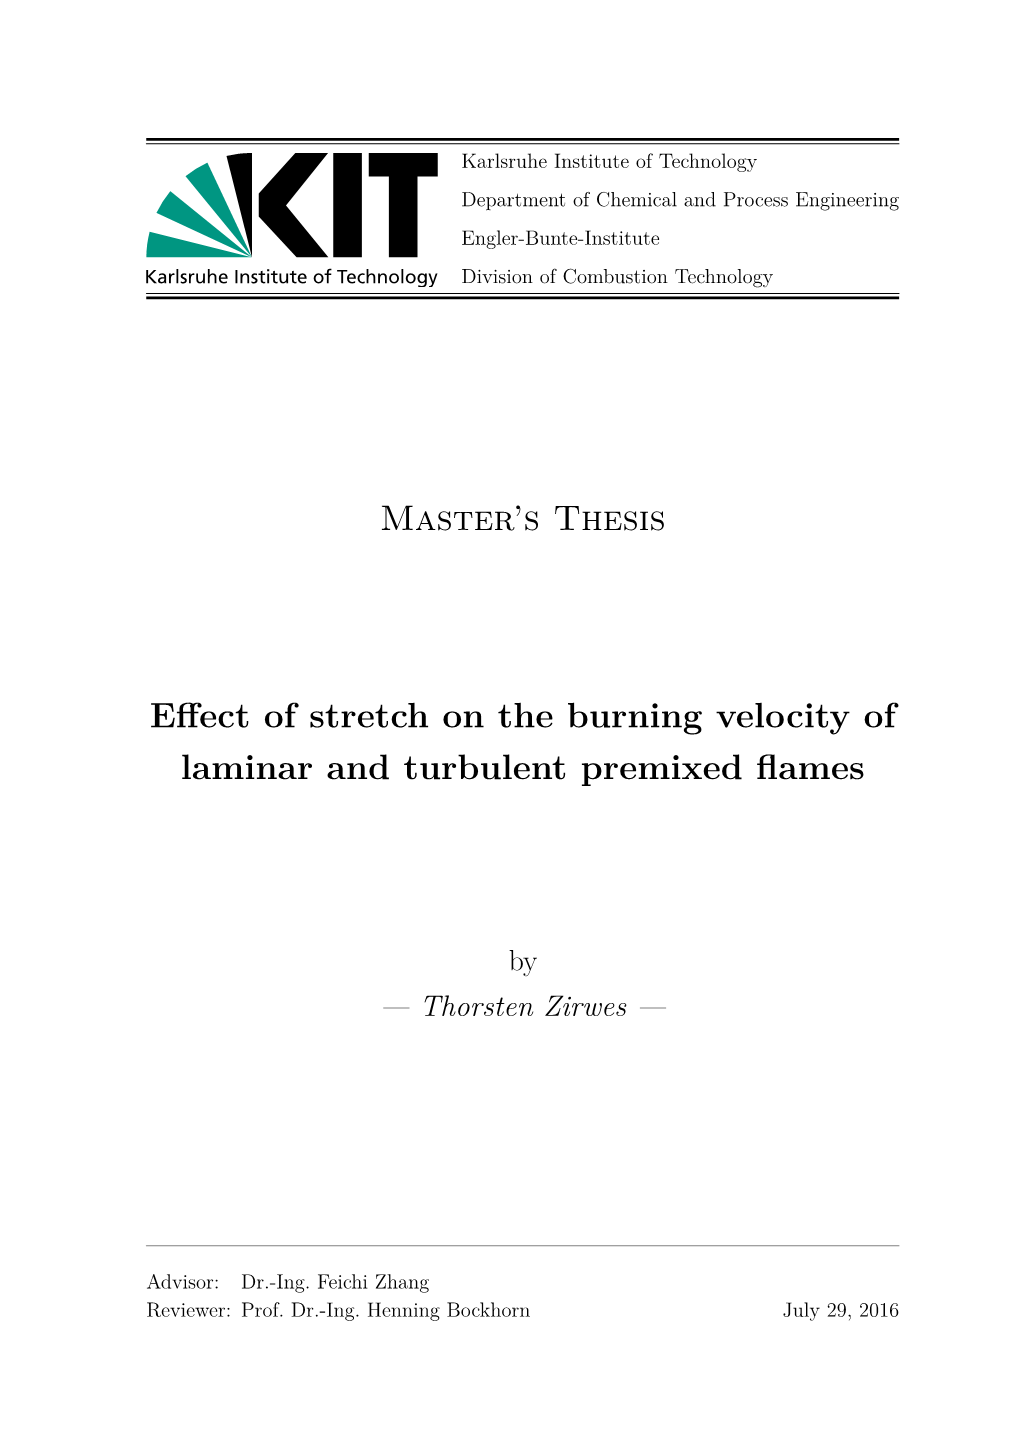 Effect of Stretch on the Burning Velocity of Laminar and Turbulent Premixed